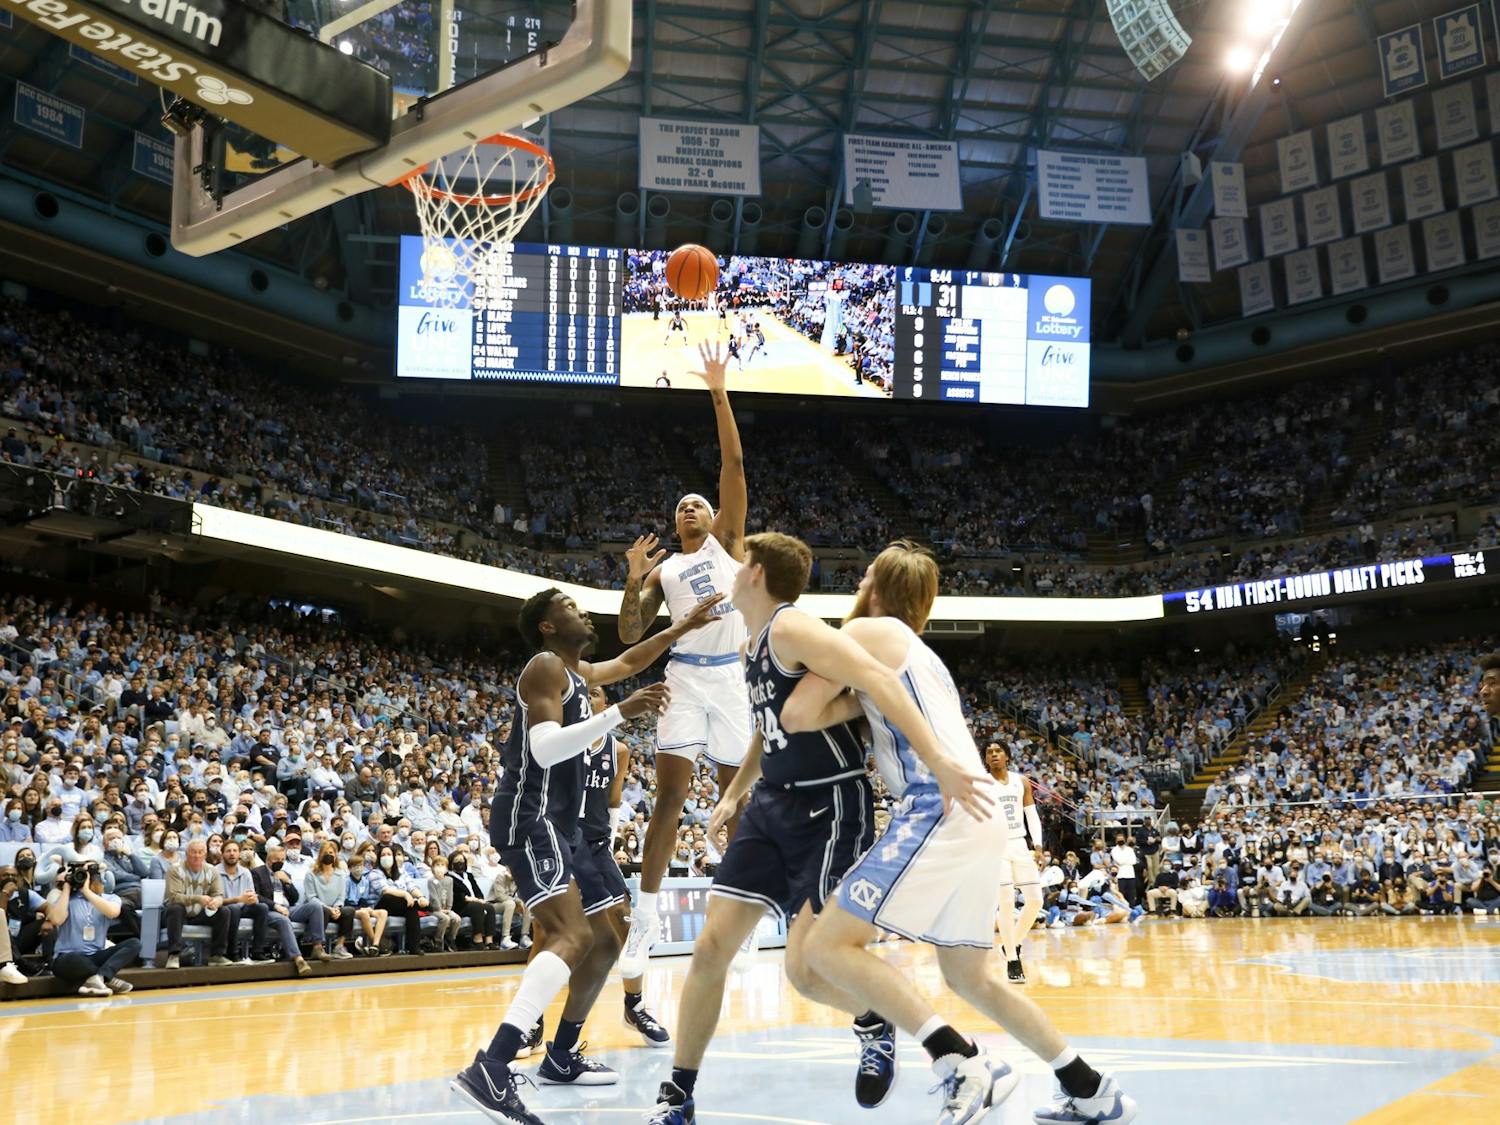 UNC junior forward Armando Bacot (5) puts up a shot from the paint during a UNC men's basketball game against Duke in the Dean Smith Center on Saturday, Feb. 5, 2022. Duke won 87-67.